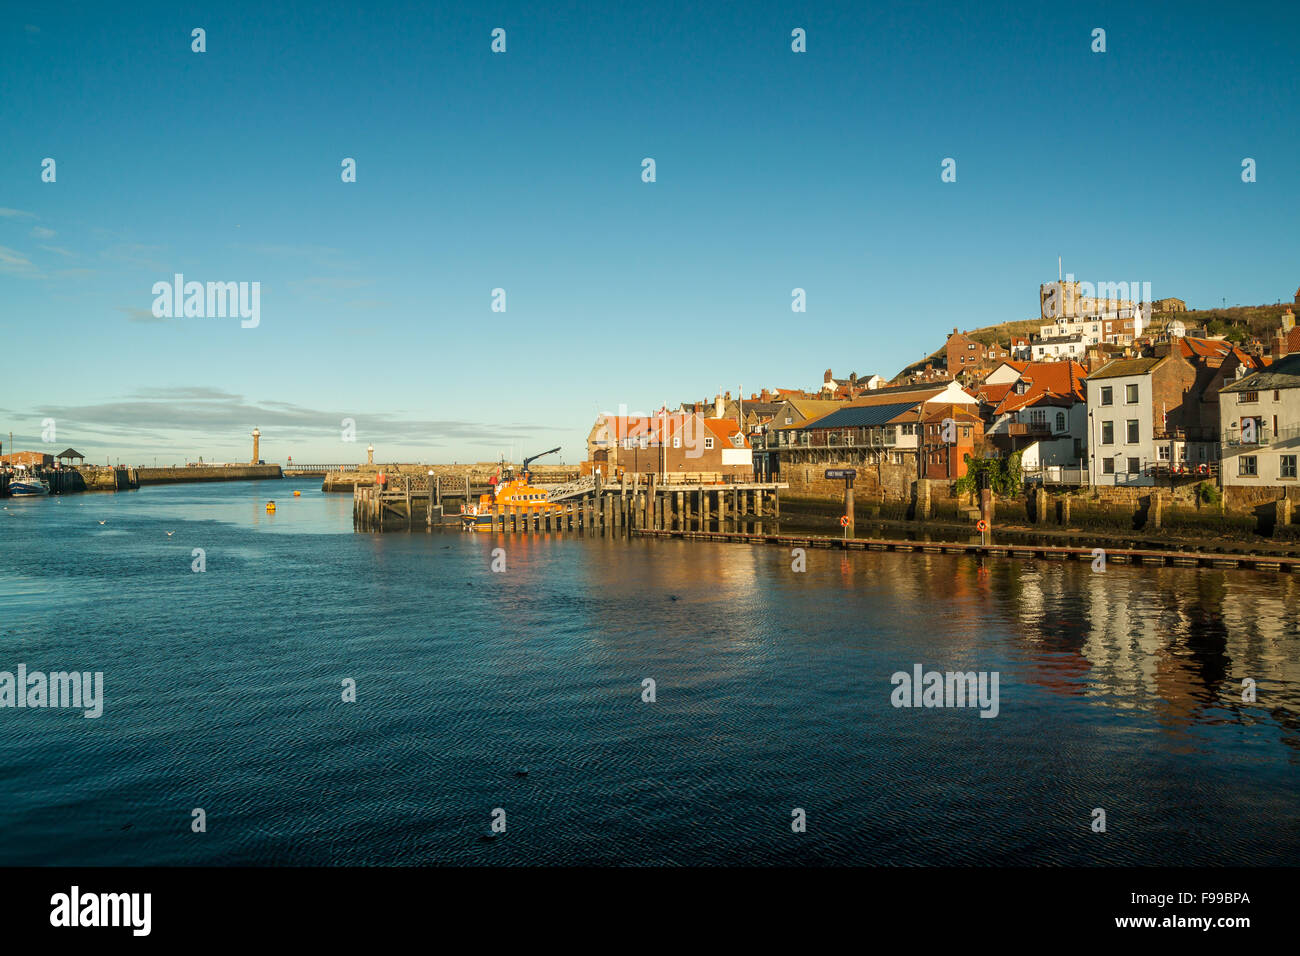 Charming seaside town of Whitby in North Yorkshire, England. Stock Photo